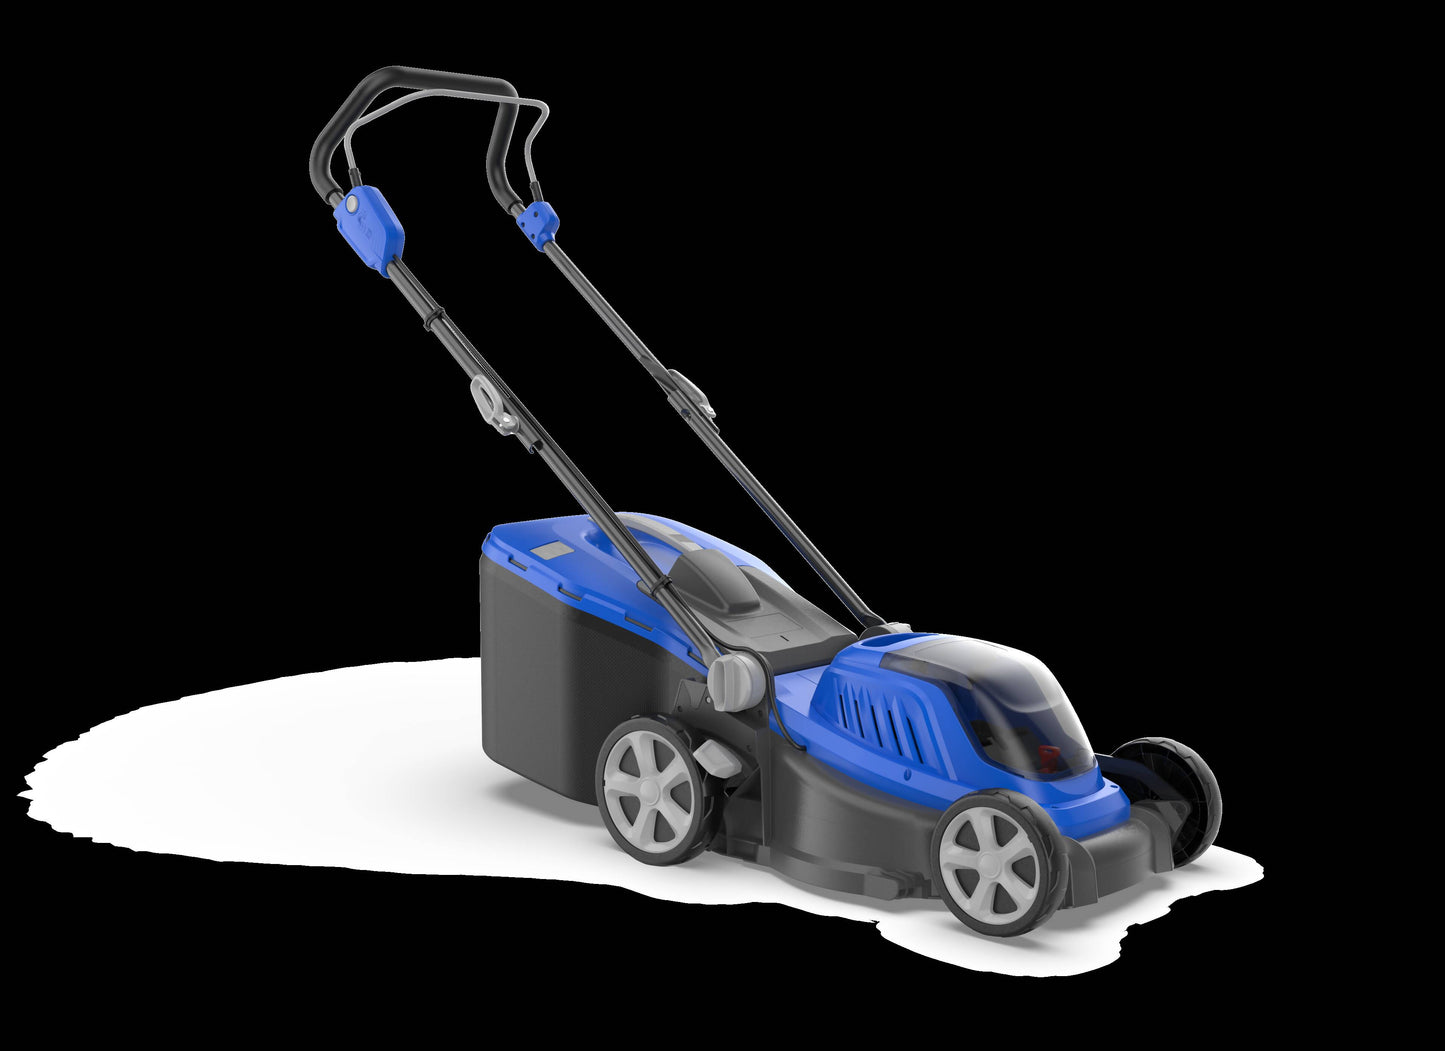 Wild Badger Power 40 Volt Brushless Lawn Mower, Includes 4.0 Ah Battery and Fast Charger